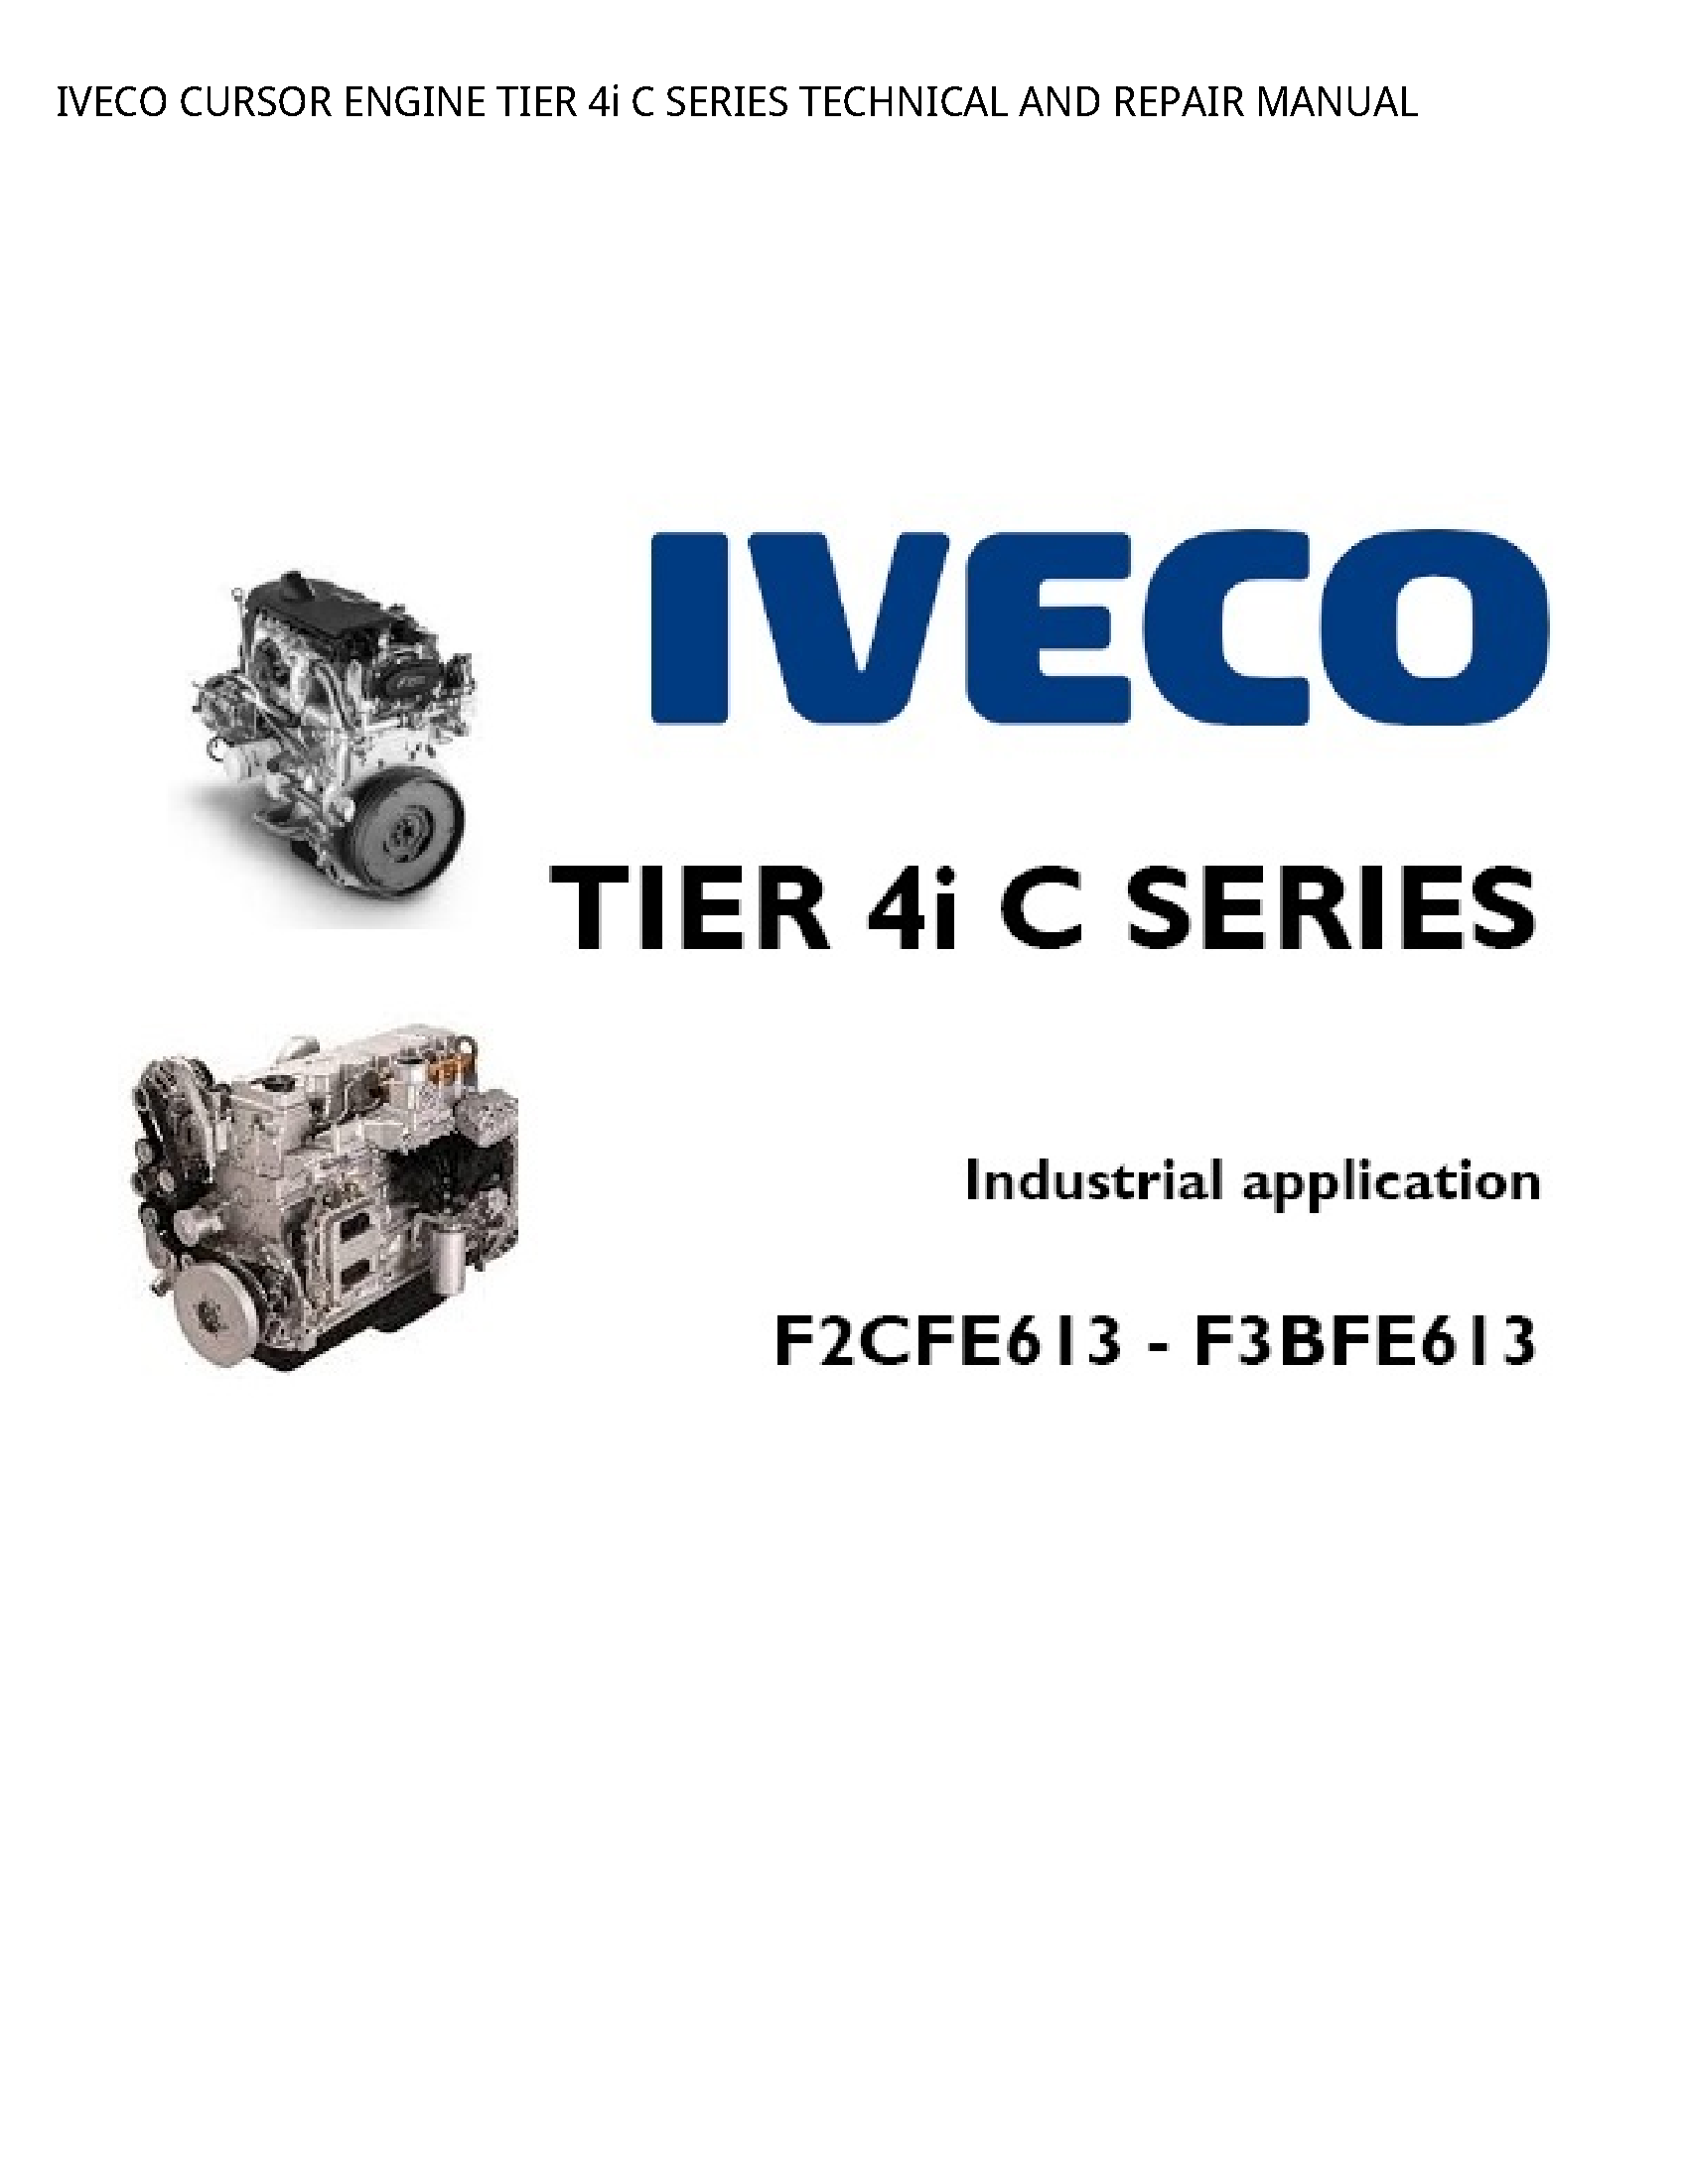 Iveco 4i CURSOR ENGINE TIER SERIES TECHNICAL AND REPAIR manual